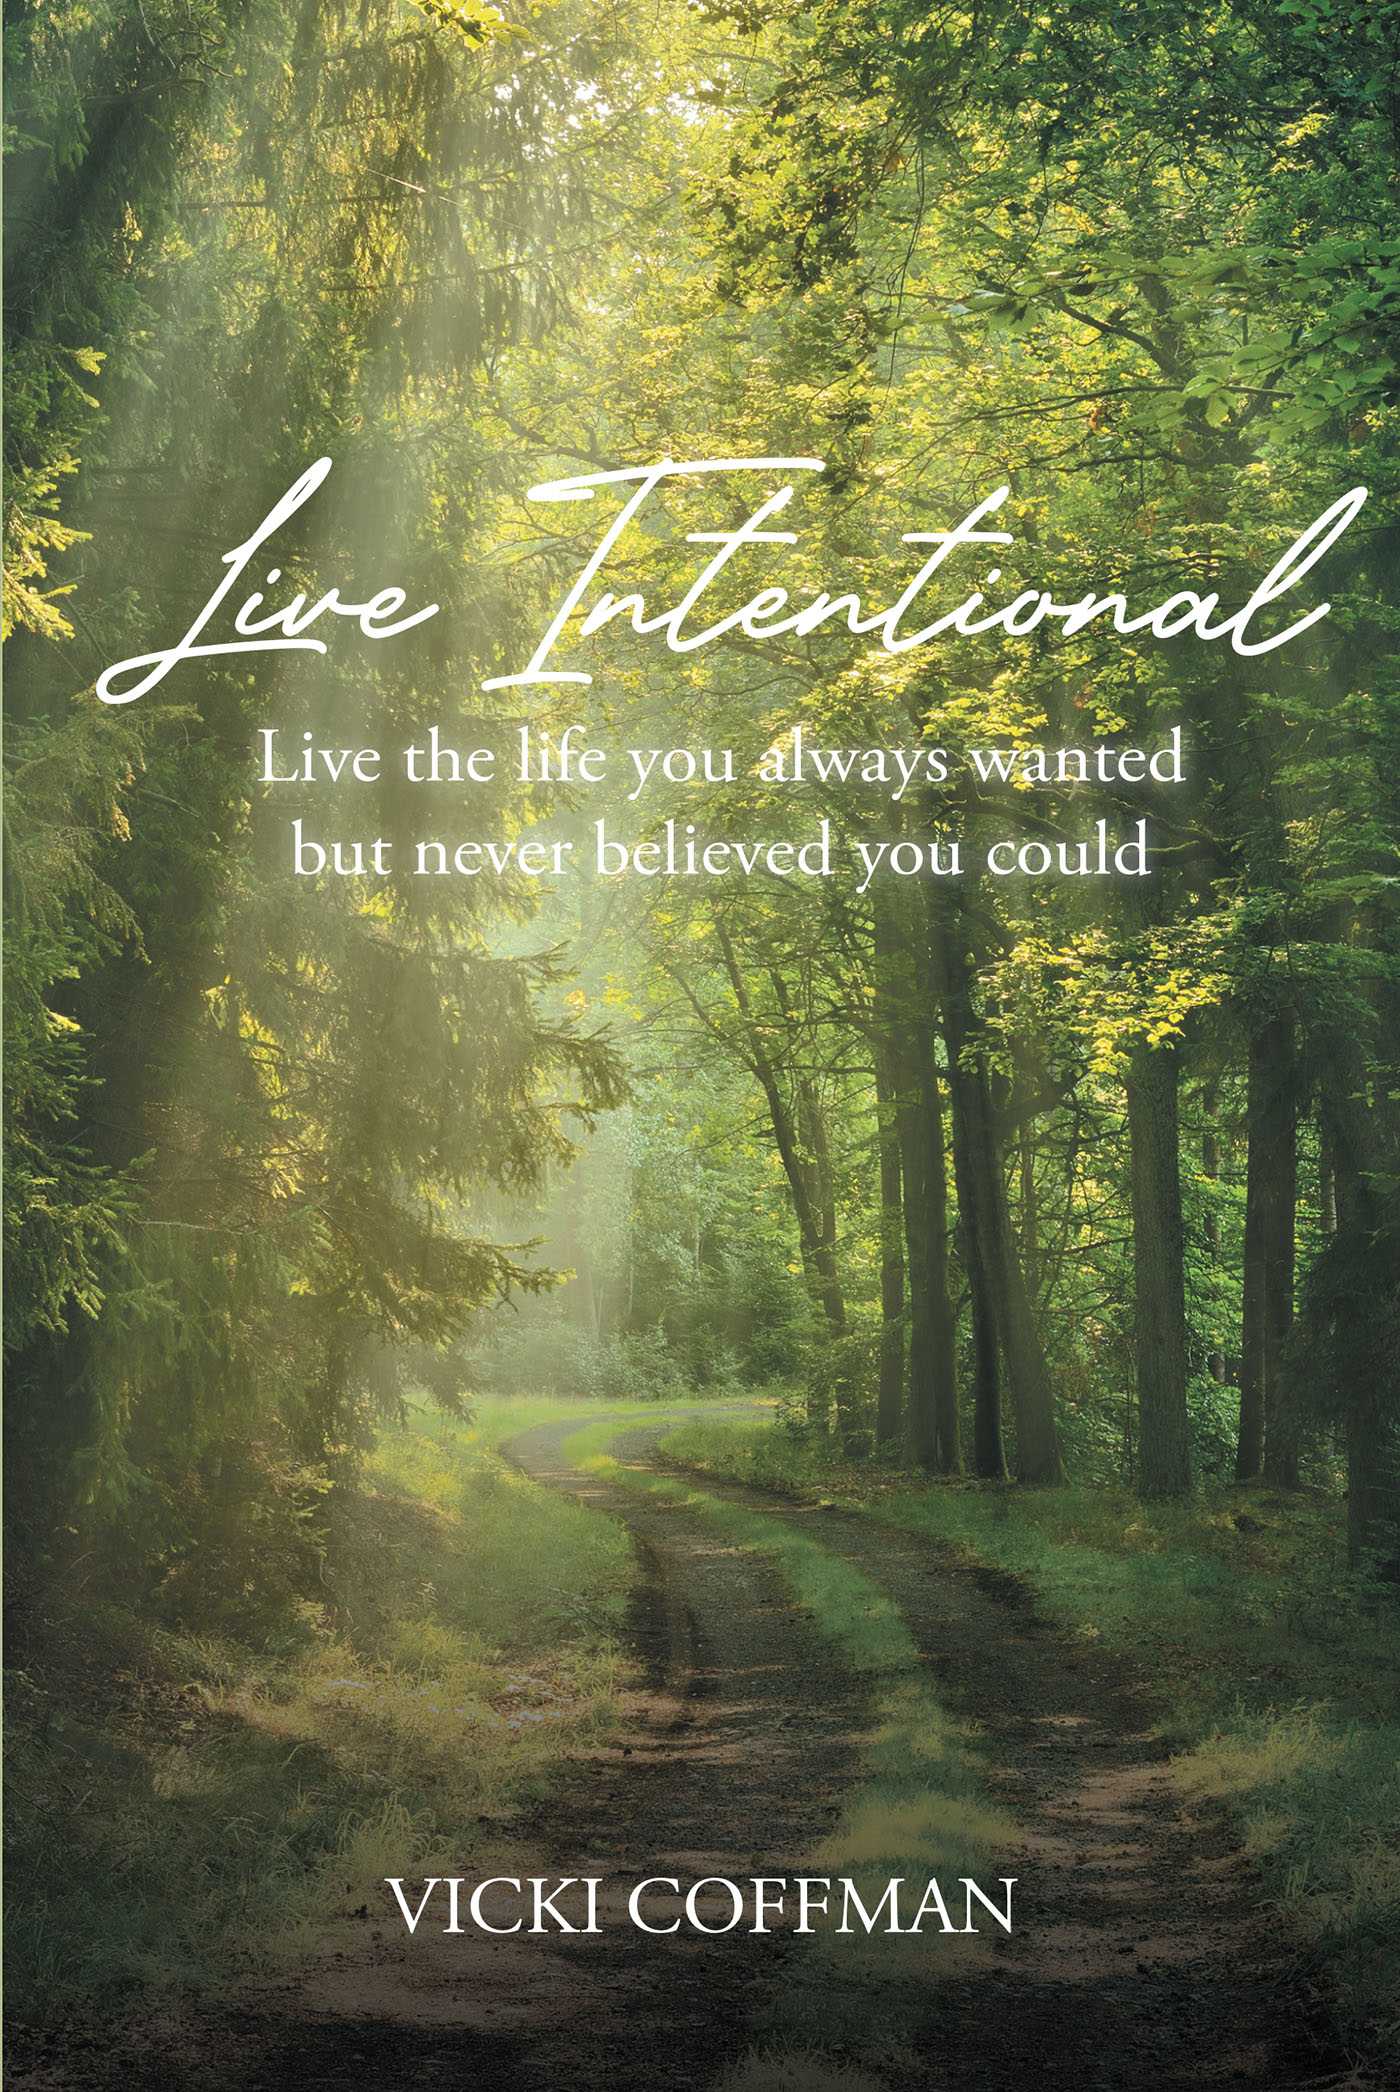 Vicki Coffman’s Newly Released “Live Intentional: Live the life you always wanted but never believed you could” is an Encouraging Message of Finding Fulfillment